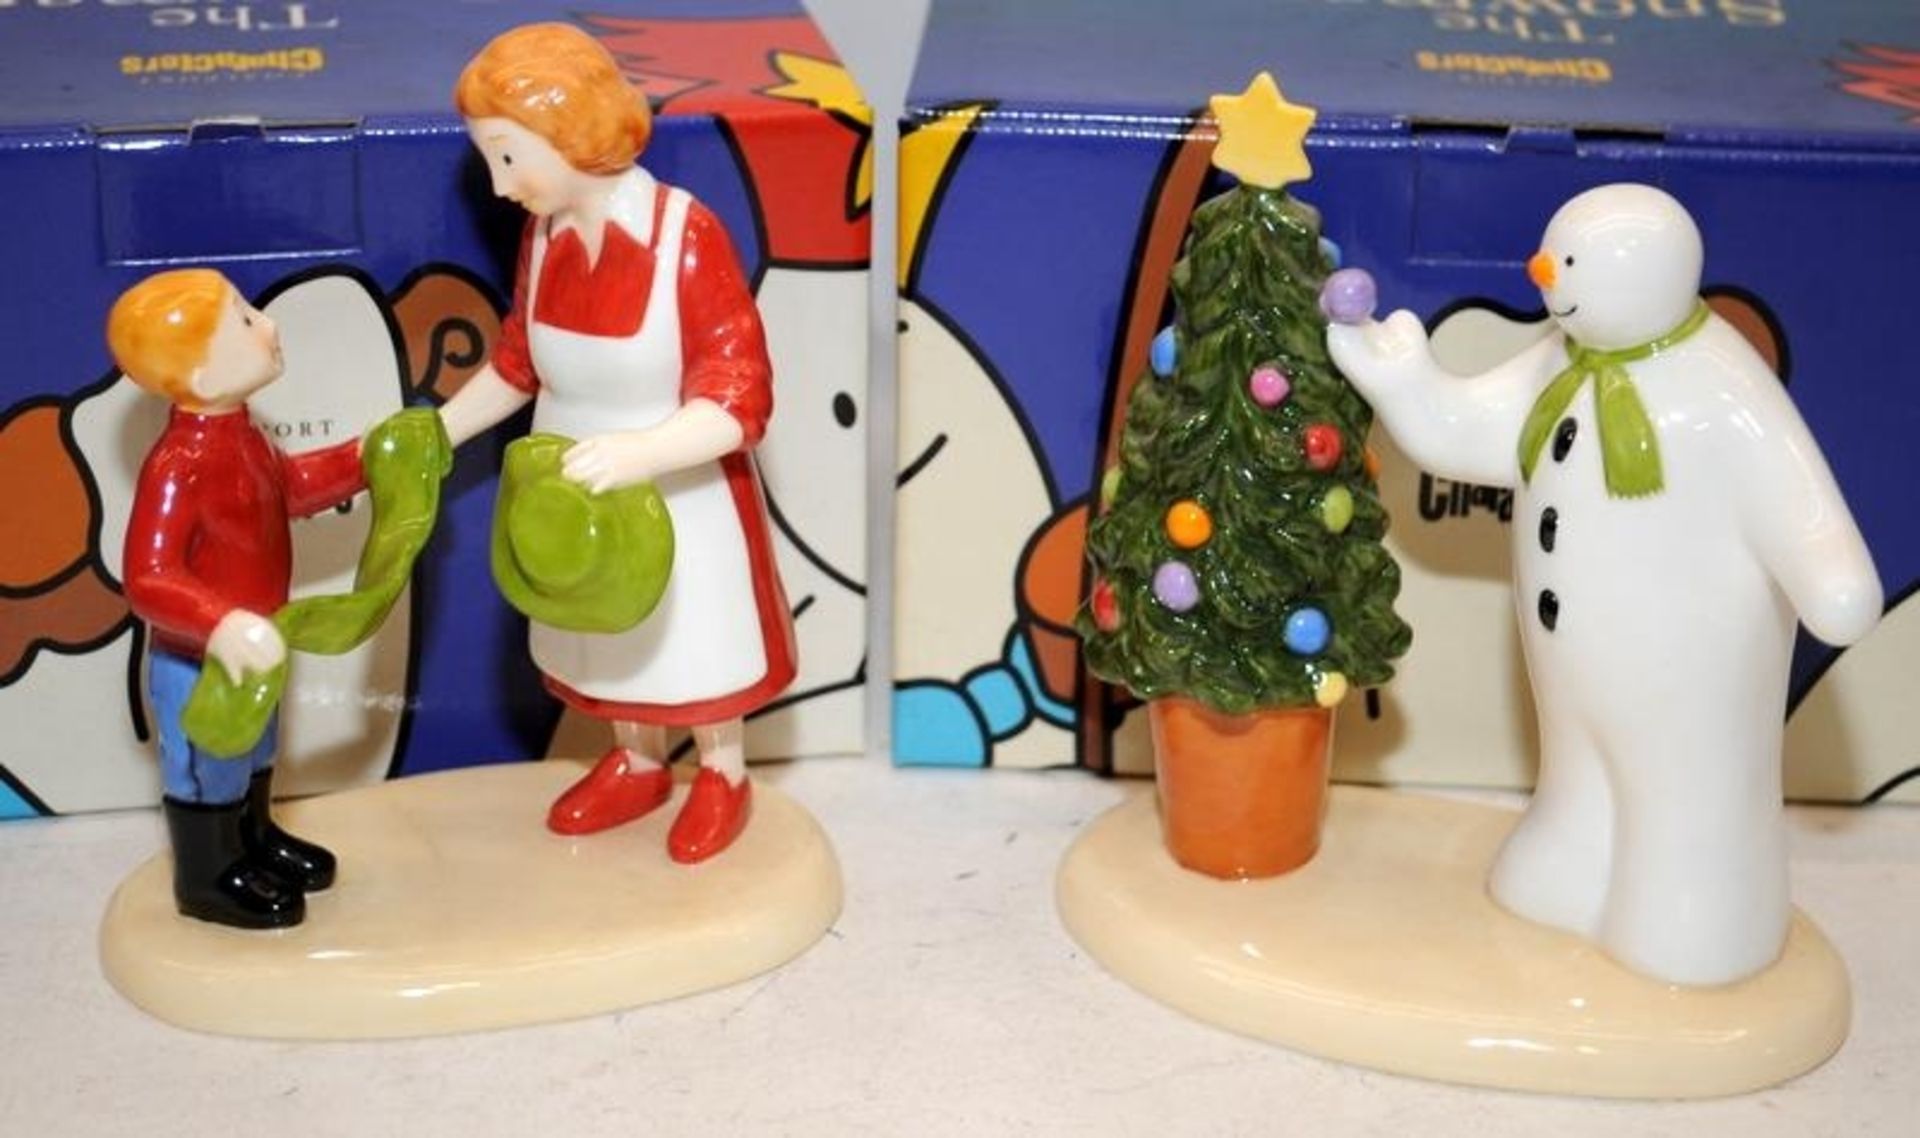 2 x Coalport The Snowman Figurines: Christmas Cheer c/w Thanks Mum. Both limited edition, boxed